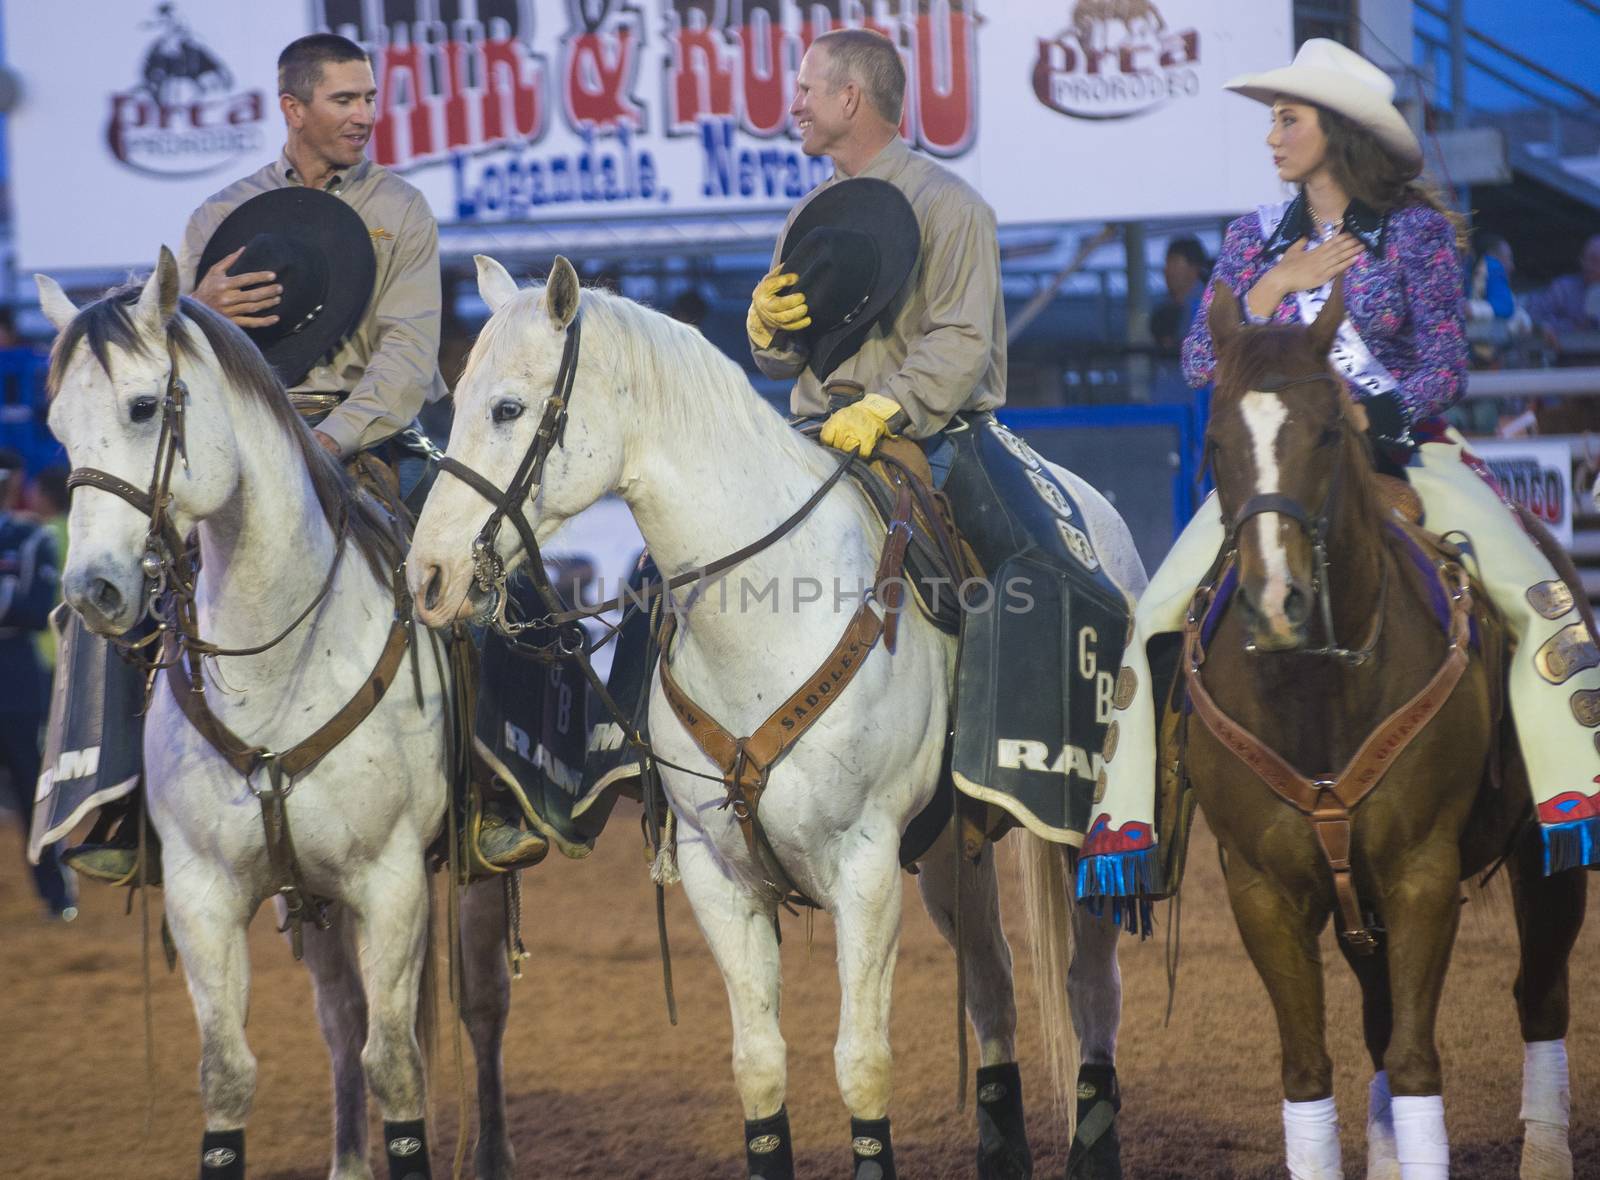 LOGANDALE , NEVADA - APRIL 10 : Cowboys and cowgirl Participates in the opening ceremony of the Clark County Rodeo held in Logandale Nevada , USA on April 10 , 2014 